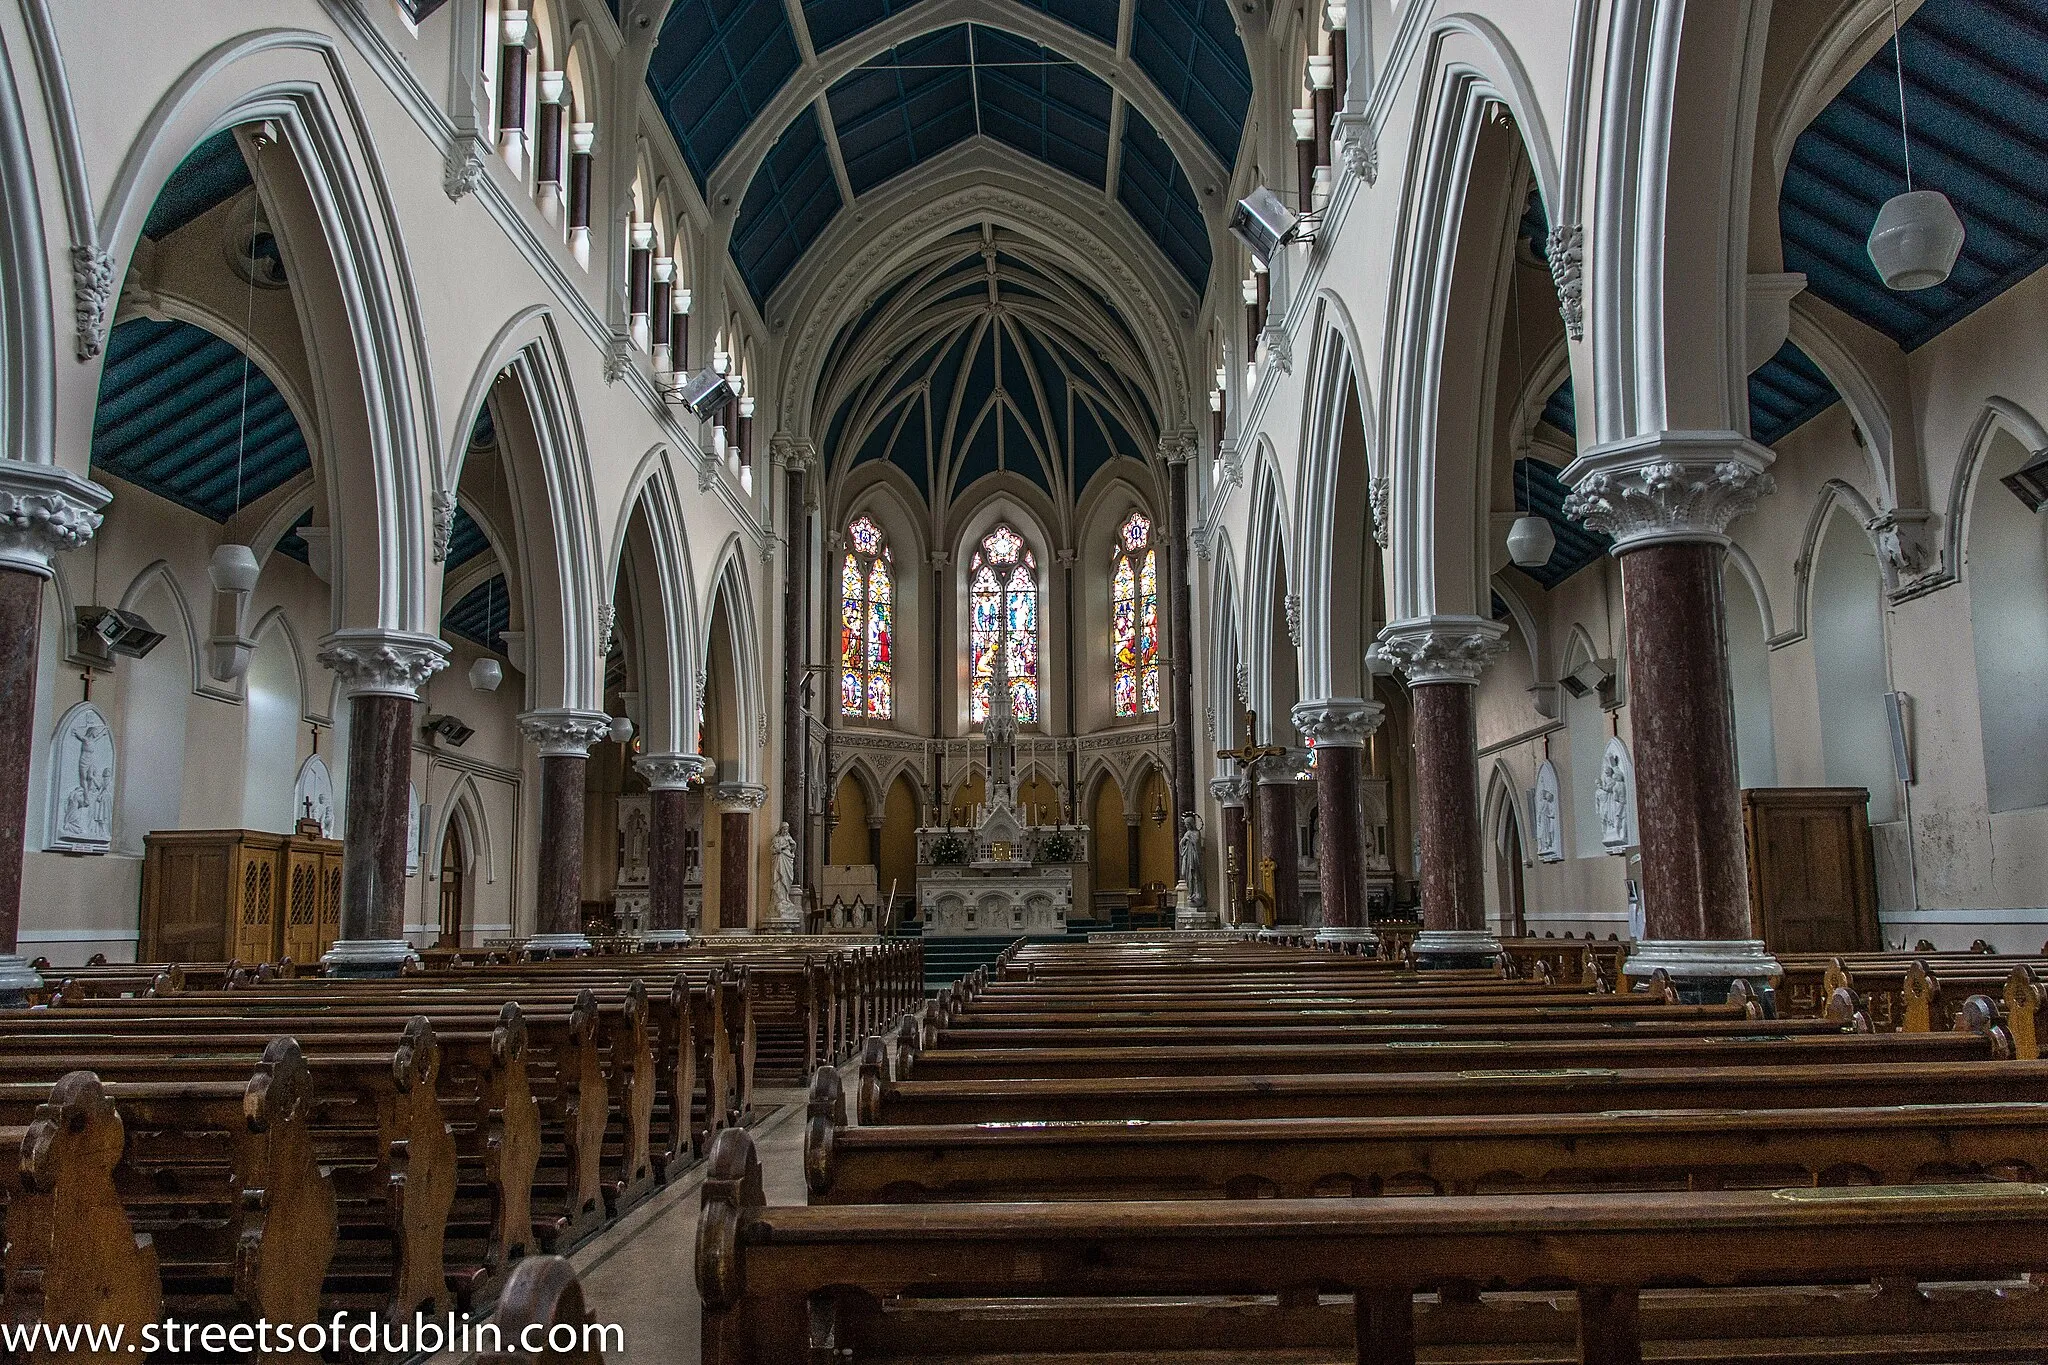 Photo showing: A site for a new church was bought at Broomwood, Monkstown, from the family of James Doherty.  Two of the finest windows in the church are dedicated to the memory of the Doherty family. In 1861, the foundation stone for the present church was laid and was dedicated to St Patrick.  It was the last of 5 churches commissioned by the same parish priest, Canon Sheridan, in the parish of Kingstown, but he died before completion.  The new Parish Priest decided to change the plans, and commissioned George Ashlin to draw up new plans.  The builder was Michael Meade.  The tender price, excluding the spire, was £5,750.